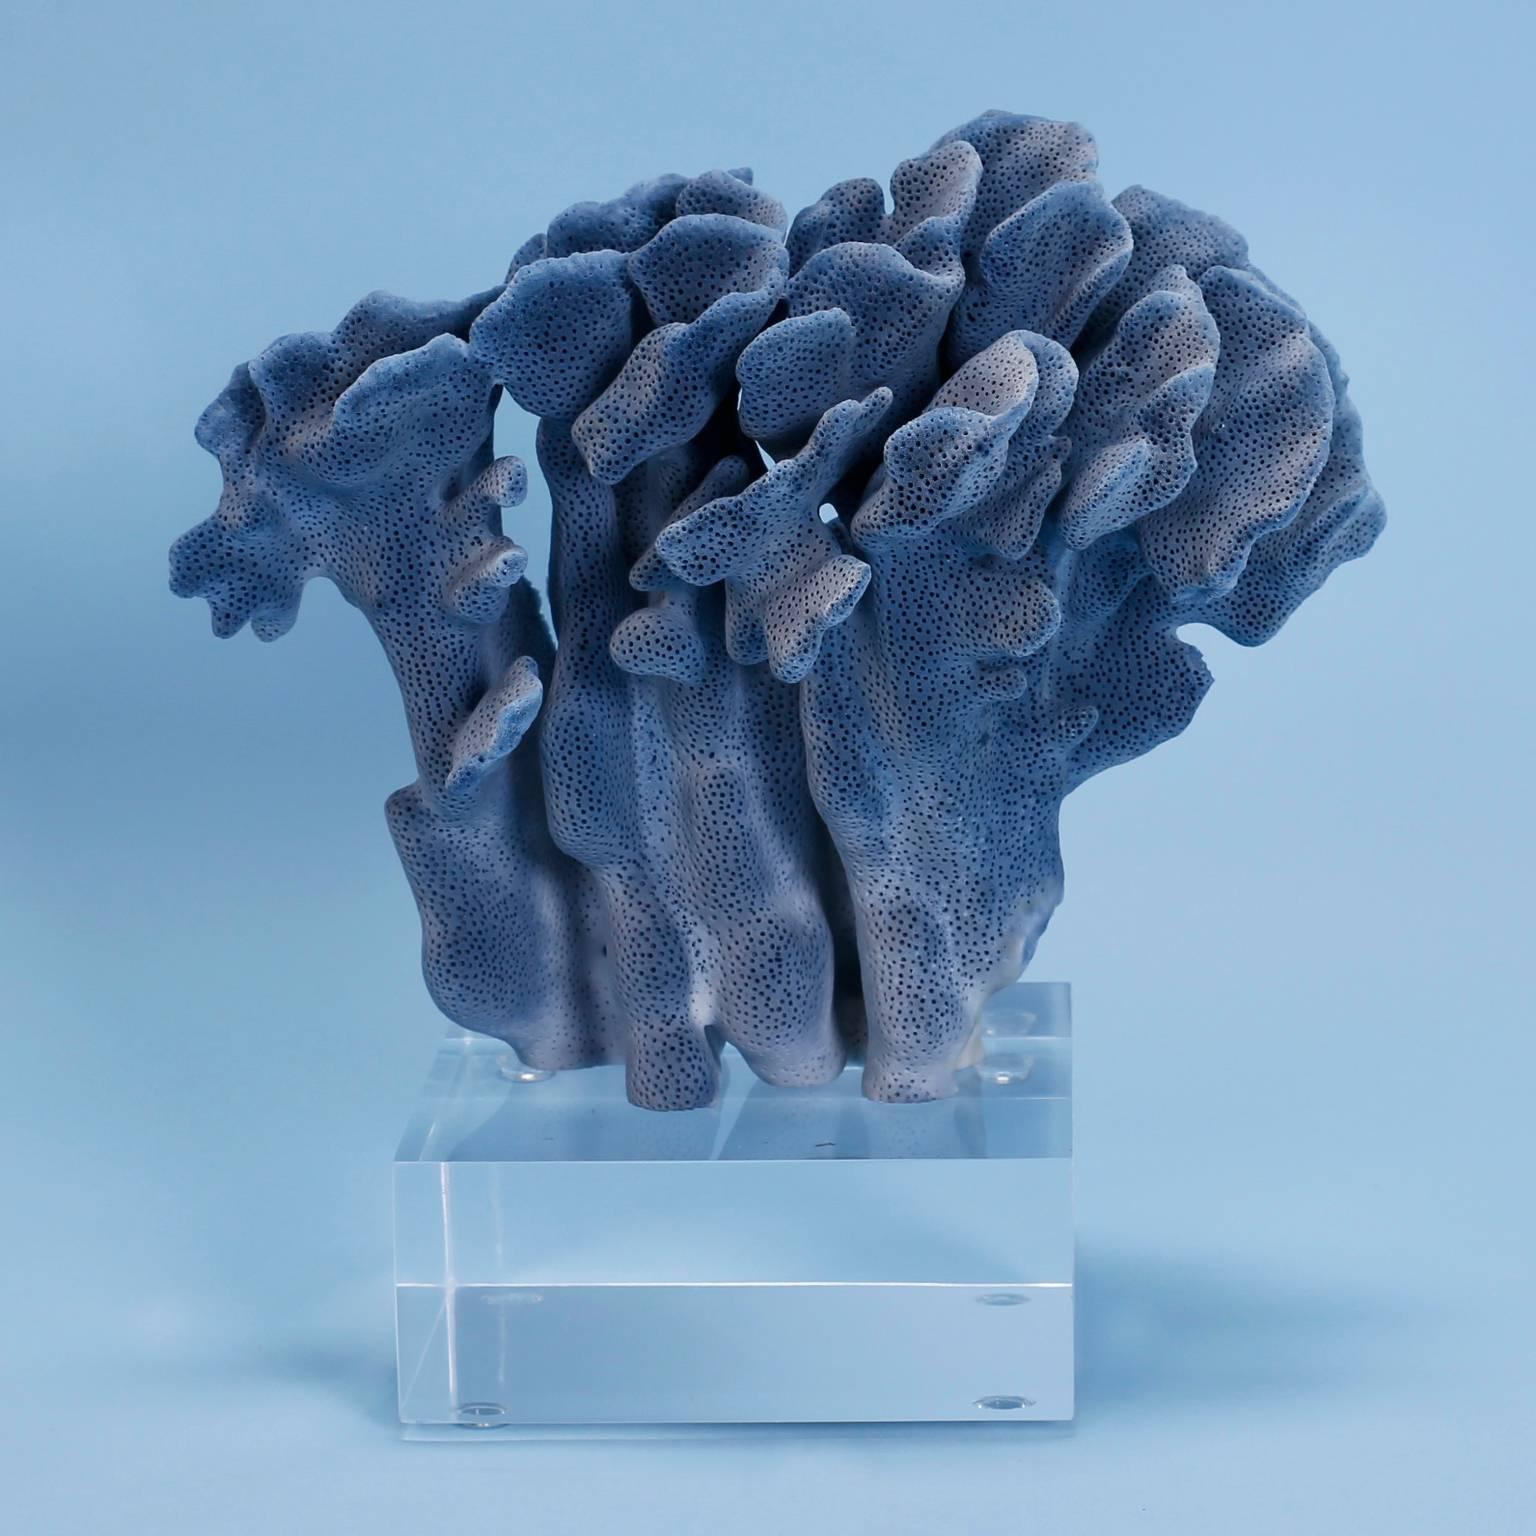 Blue coral specimen with an alluring blue hue, sea worthy texture, and unique sculptural form. Mounted on a thick custom Lucite stand.

From left to right:

Ref: BL03 H 10, W 9, D 5 SOLD
Ref: BL04 H 9, W 8, D 7 $685.00
Ref: BL05 H 9, W 7, D 5